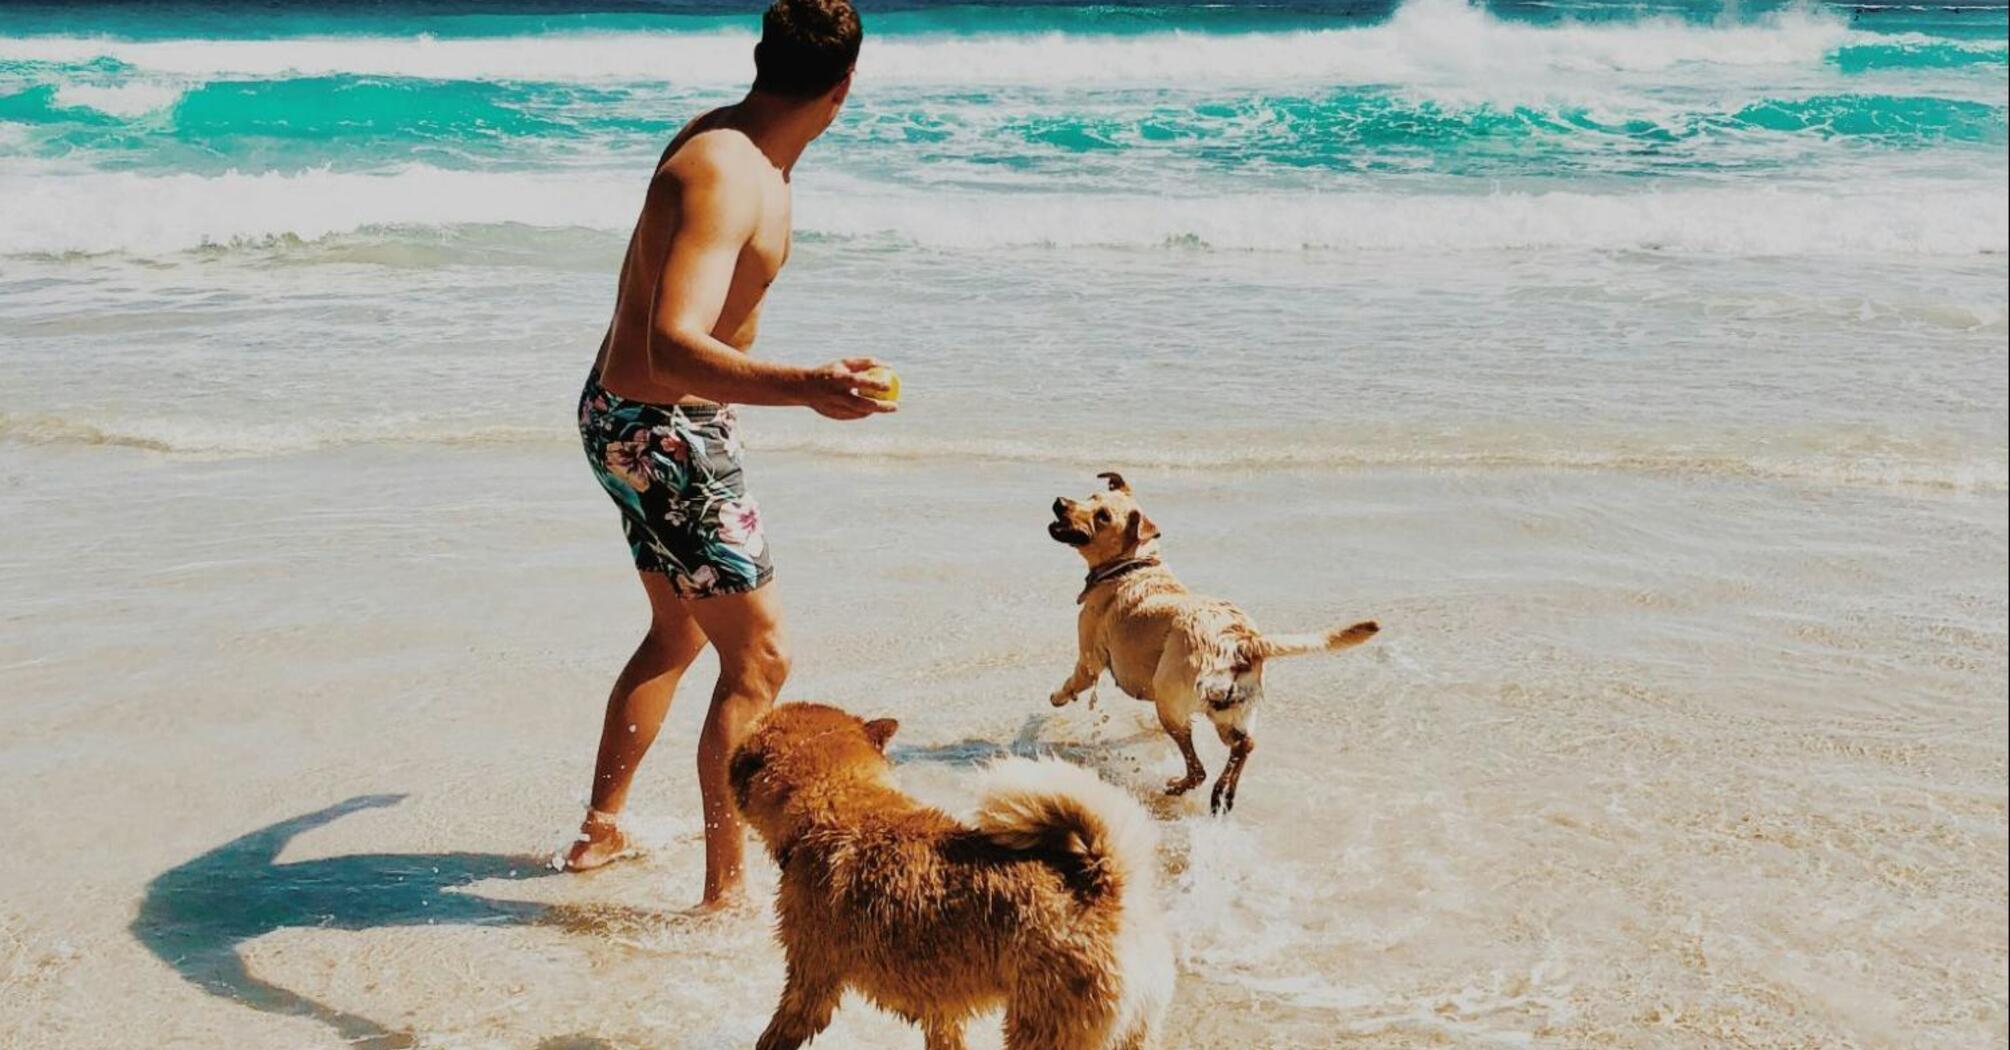 Man playing with the dogs on the beach